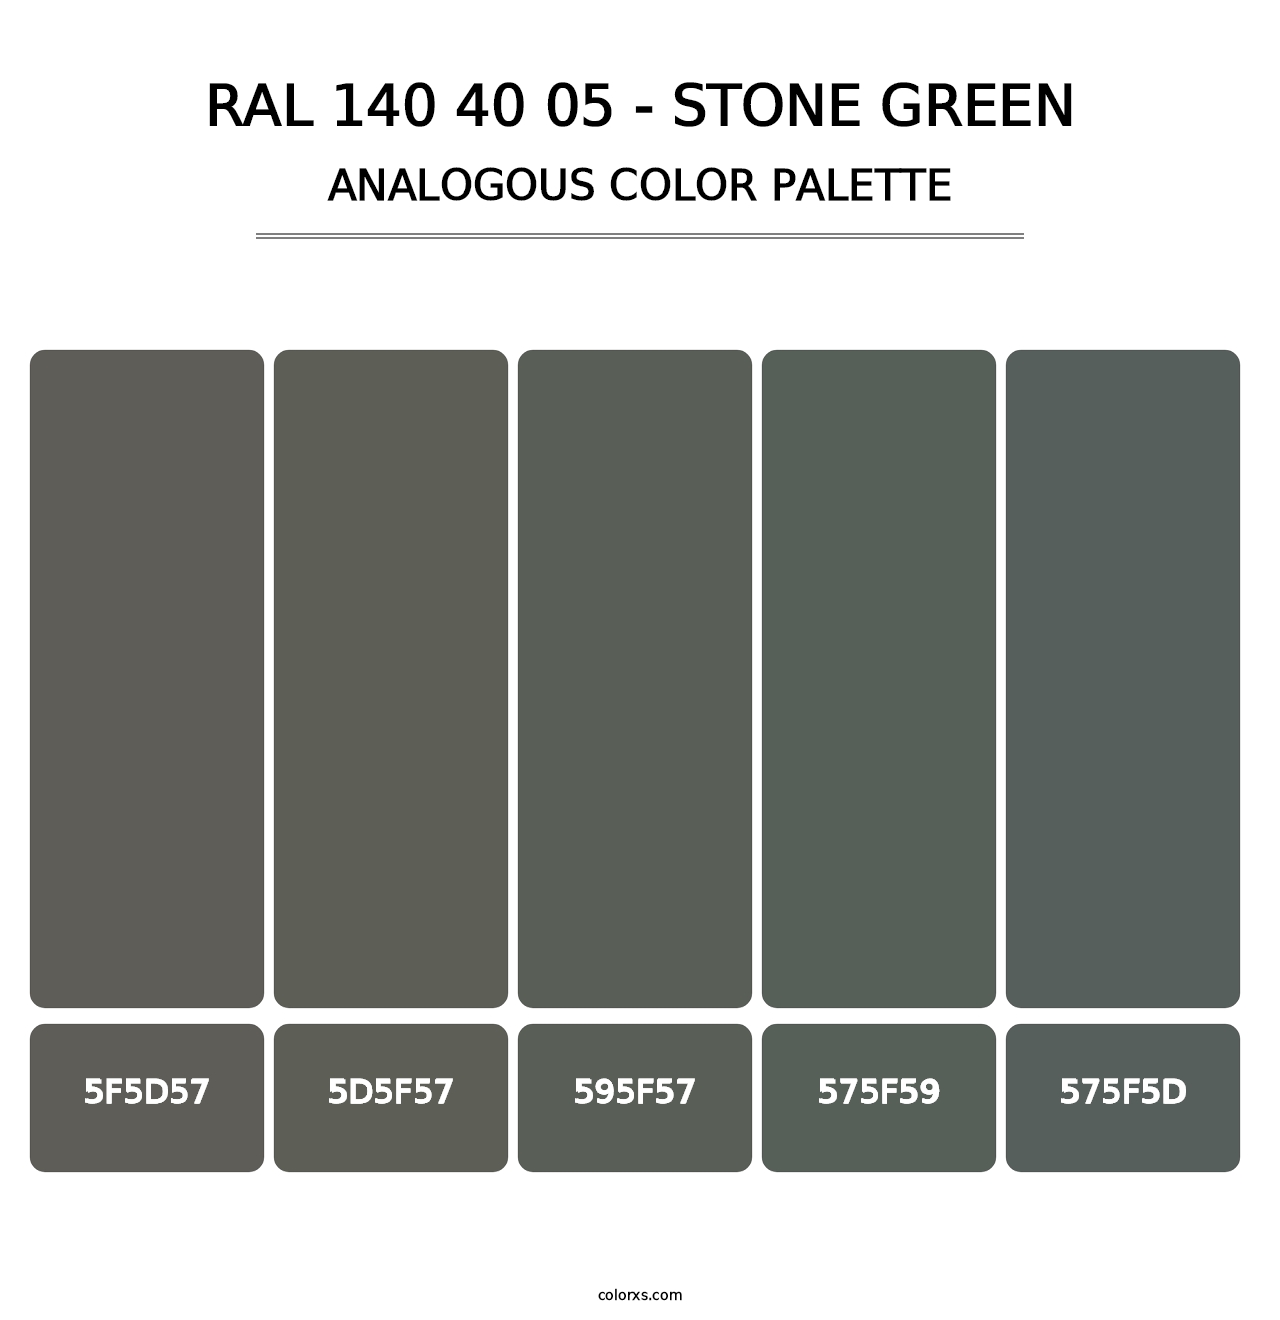 RAL 140 40 05 - Stone Green - Analogous Color Palette